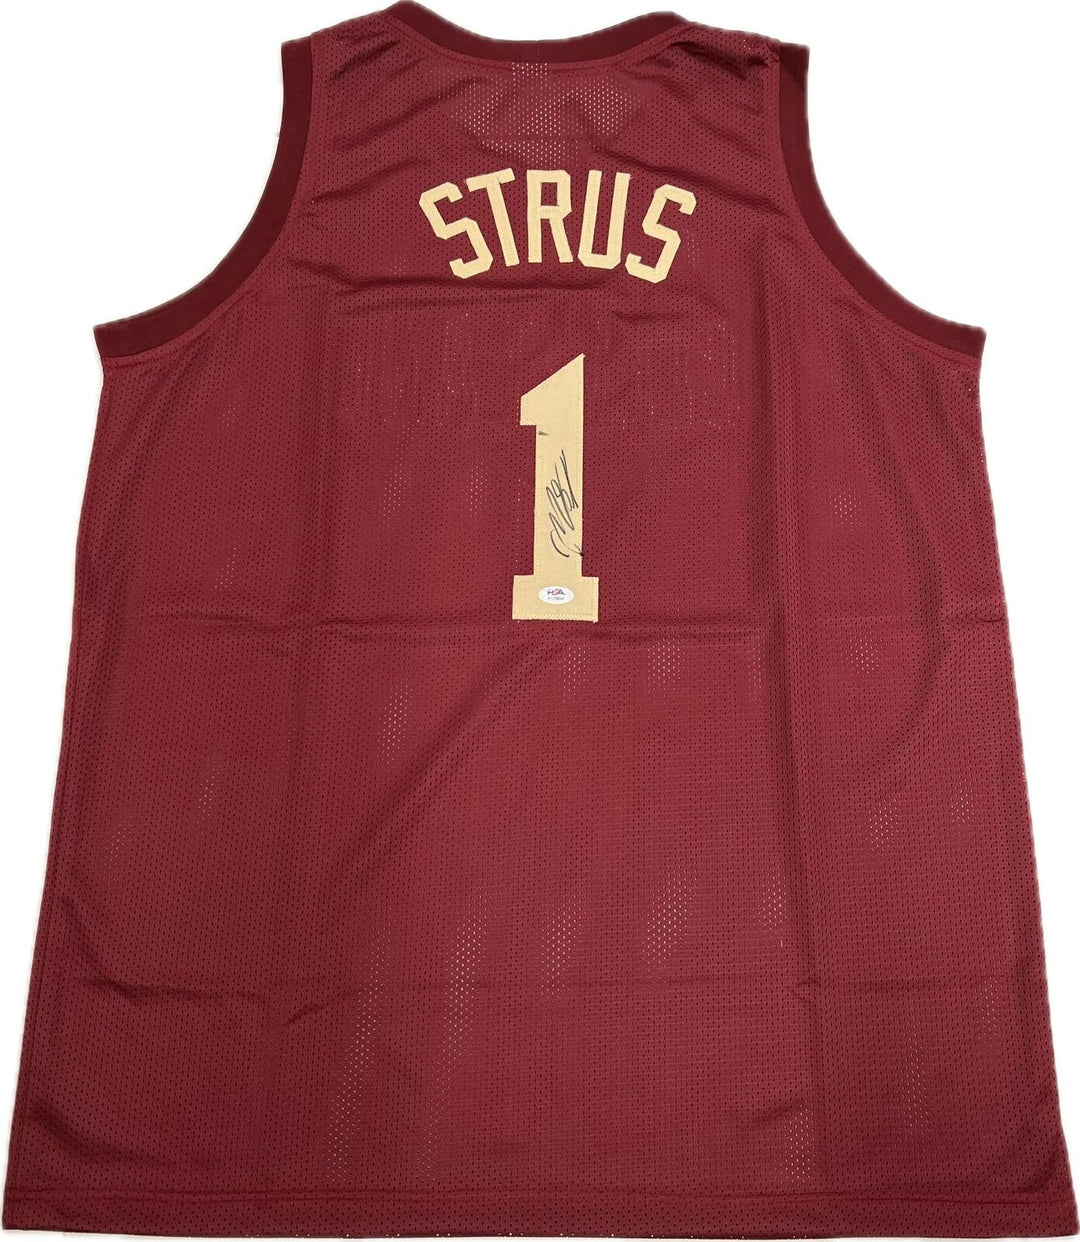 Max Strus signed jersey PSA/DNA Cleveland Cavaliers Autographed Image 1